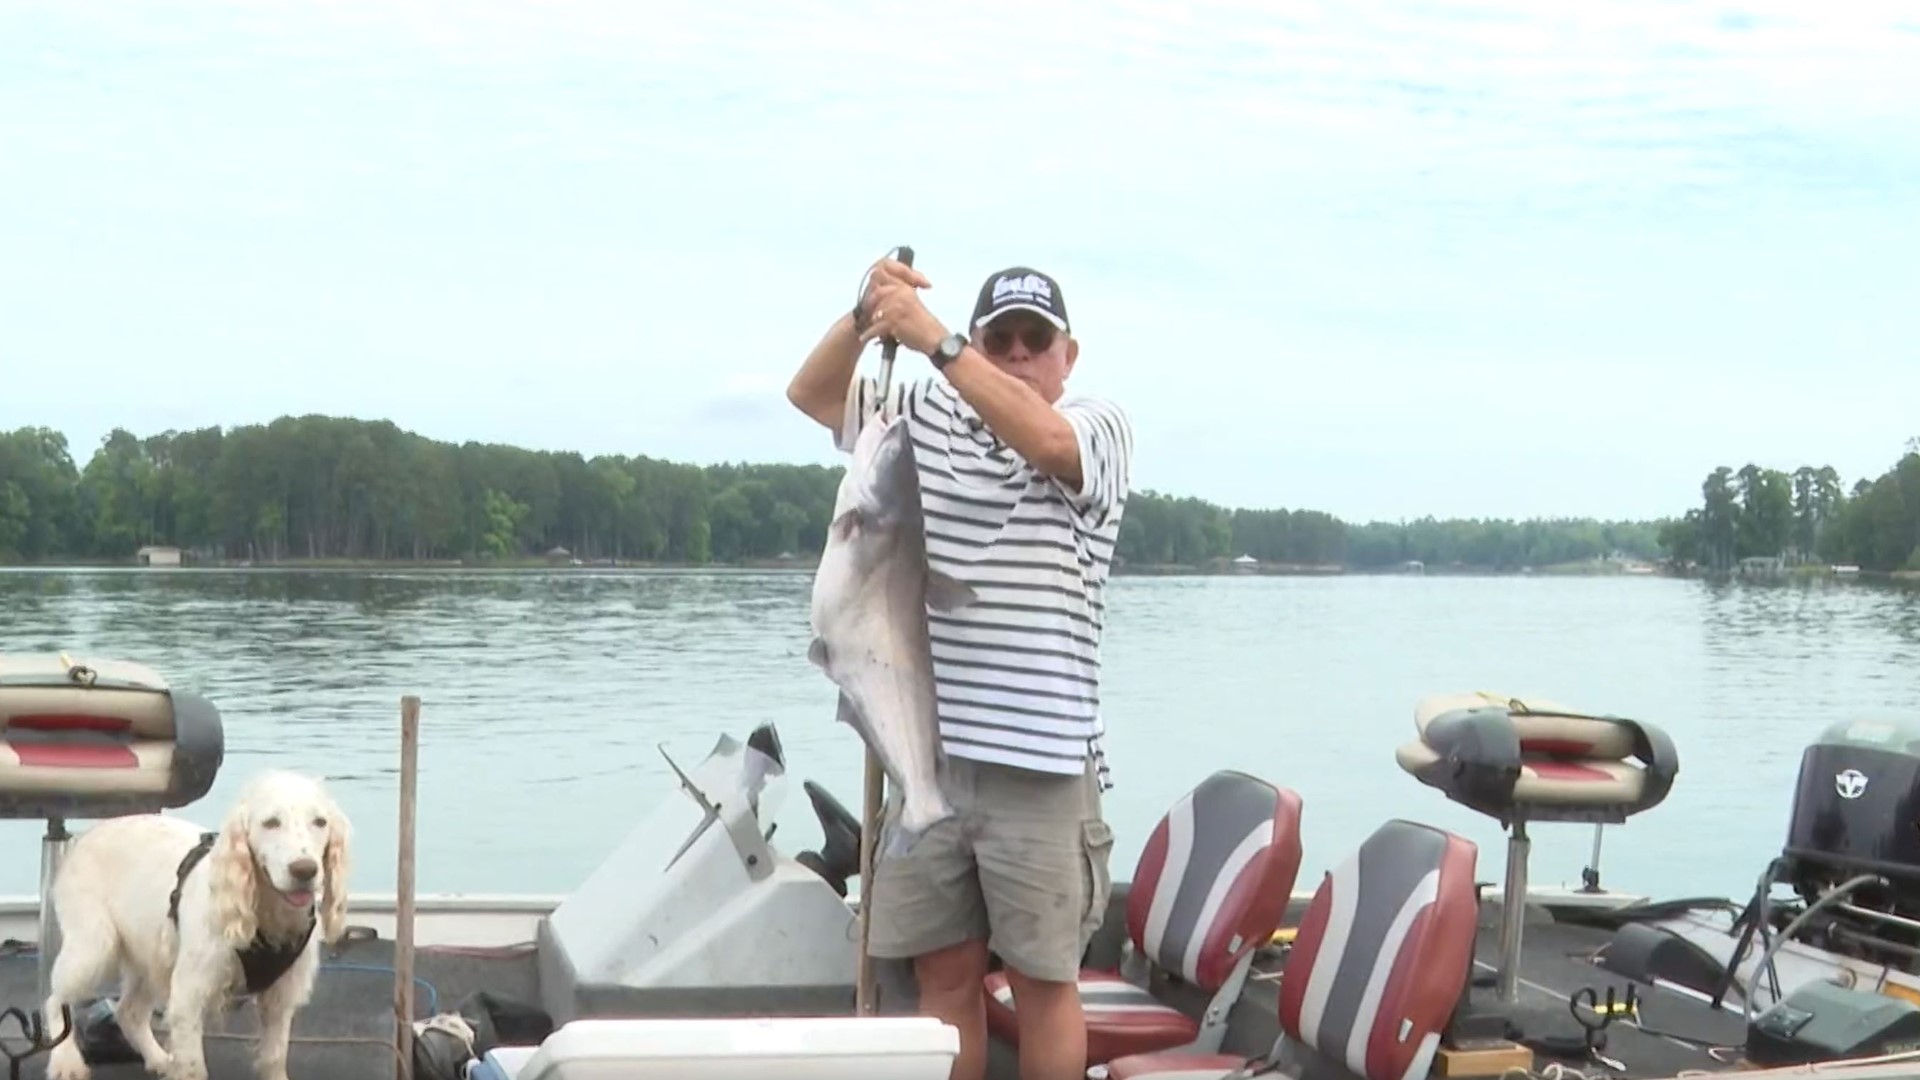 Dick Joyner catches a fish less than an hour after dropping the noodle in the water!